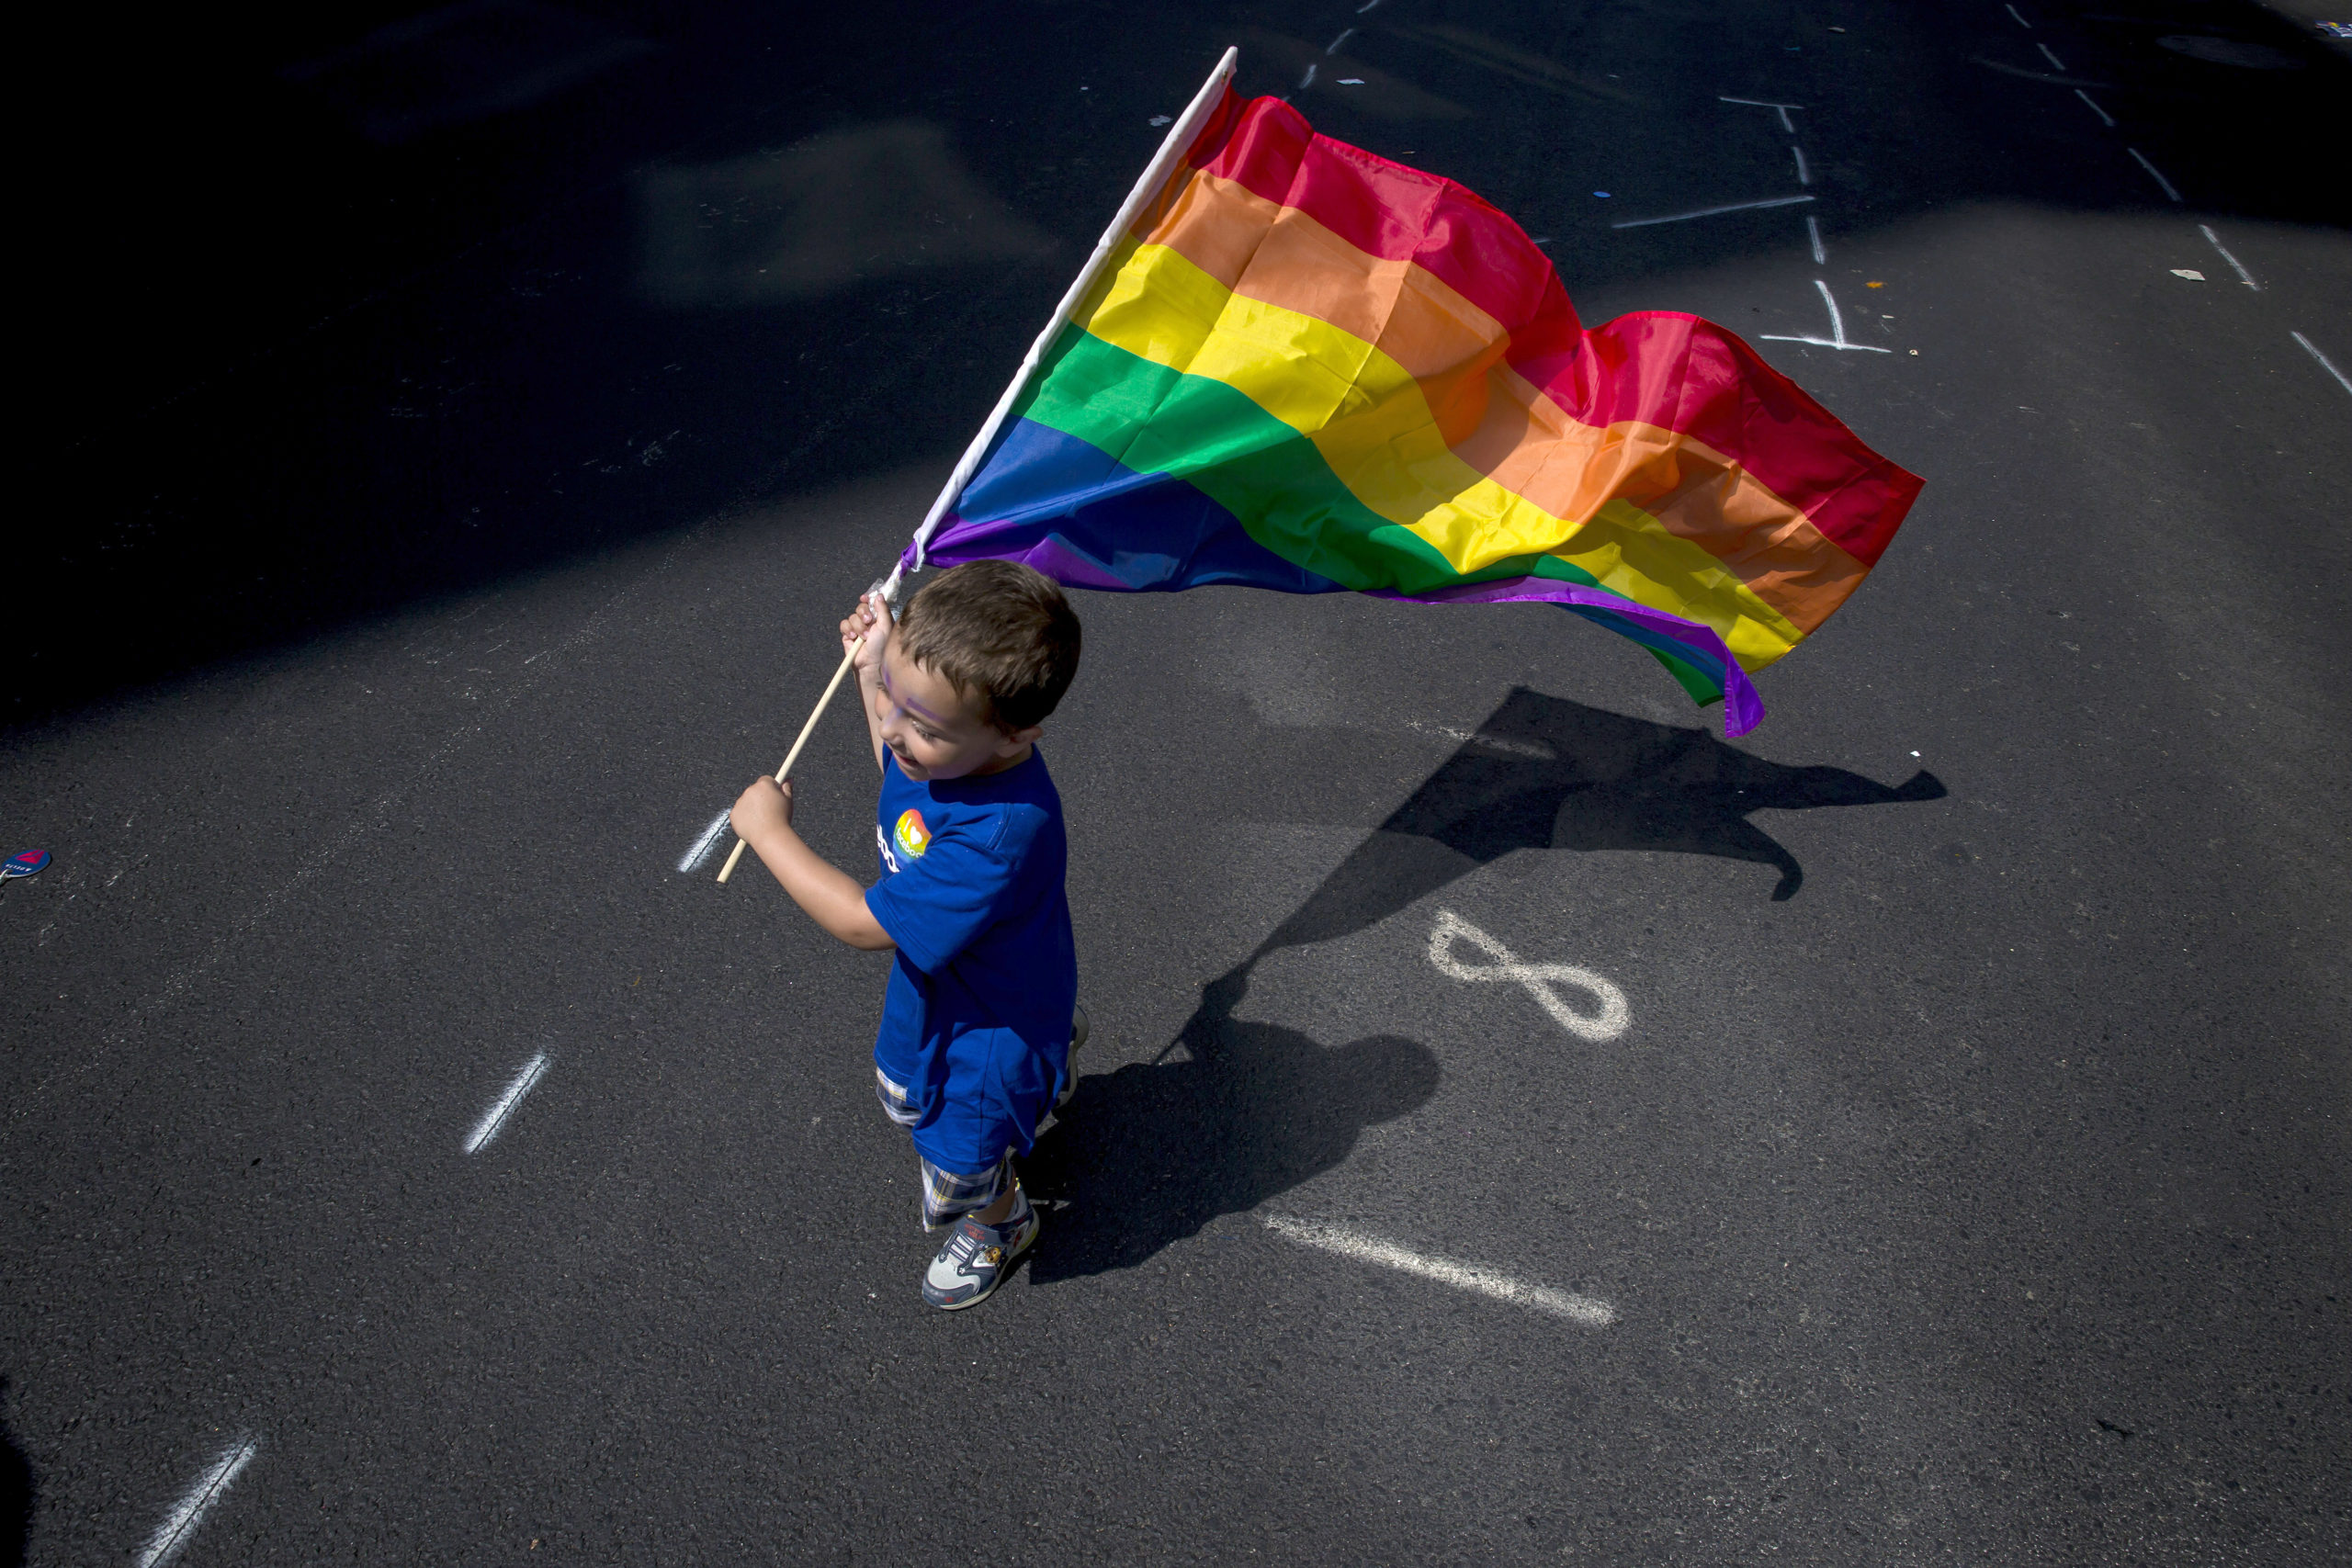 A boy carries a flag during the New York City Pride March, June 26, 2016 in New York City. This year was the 46th Pride march in New York City (Photo by Eric Thayer/Getty Images)